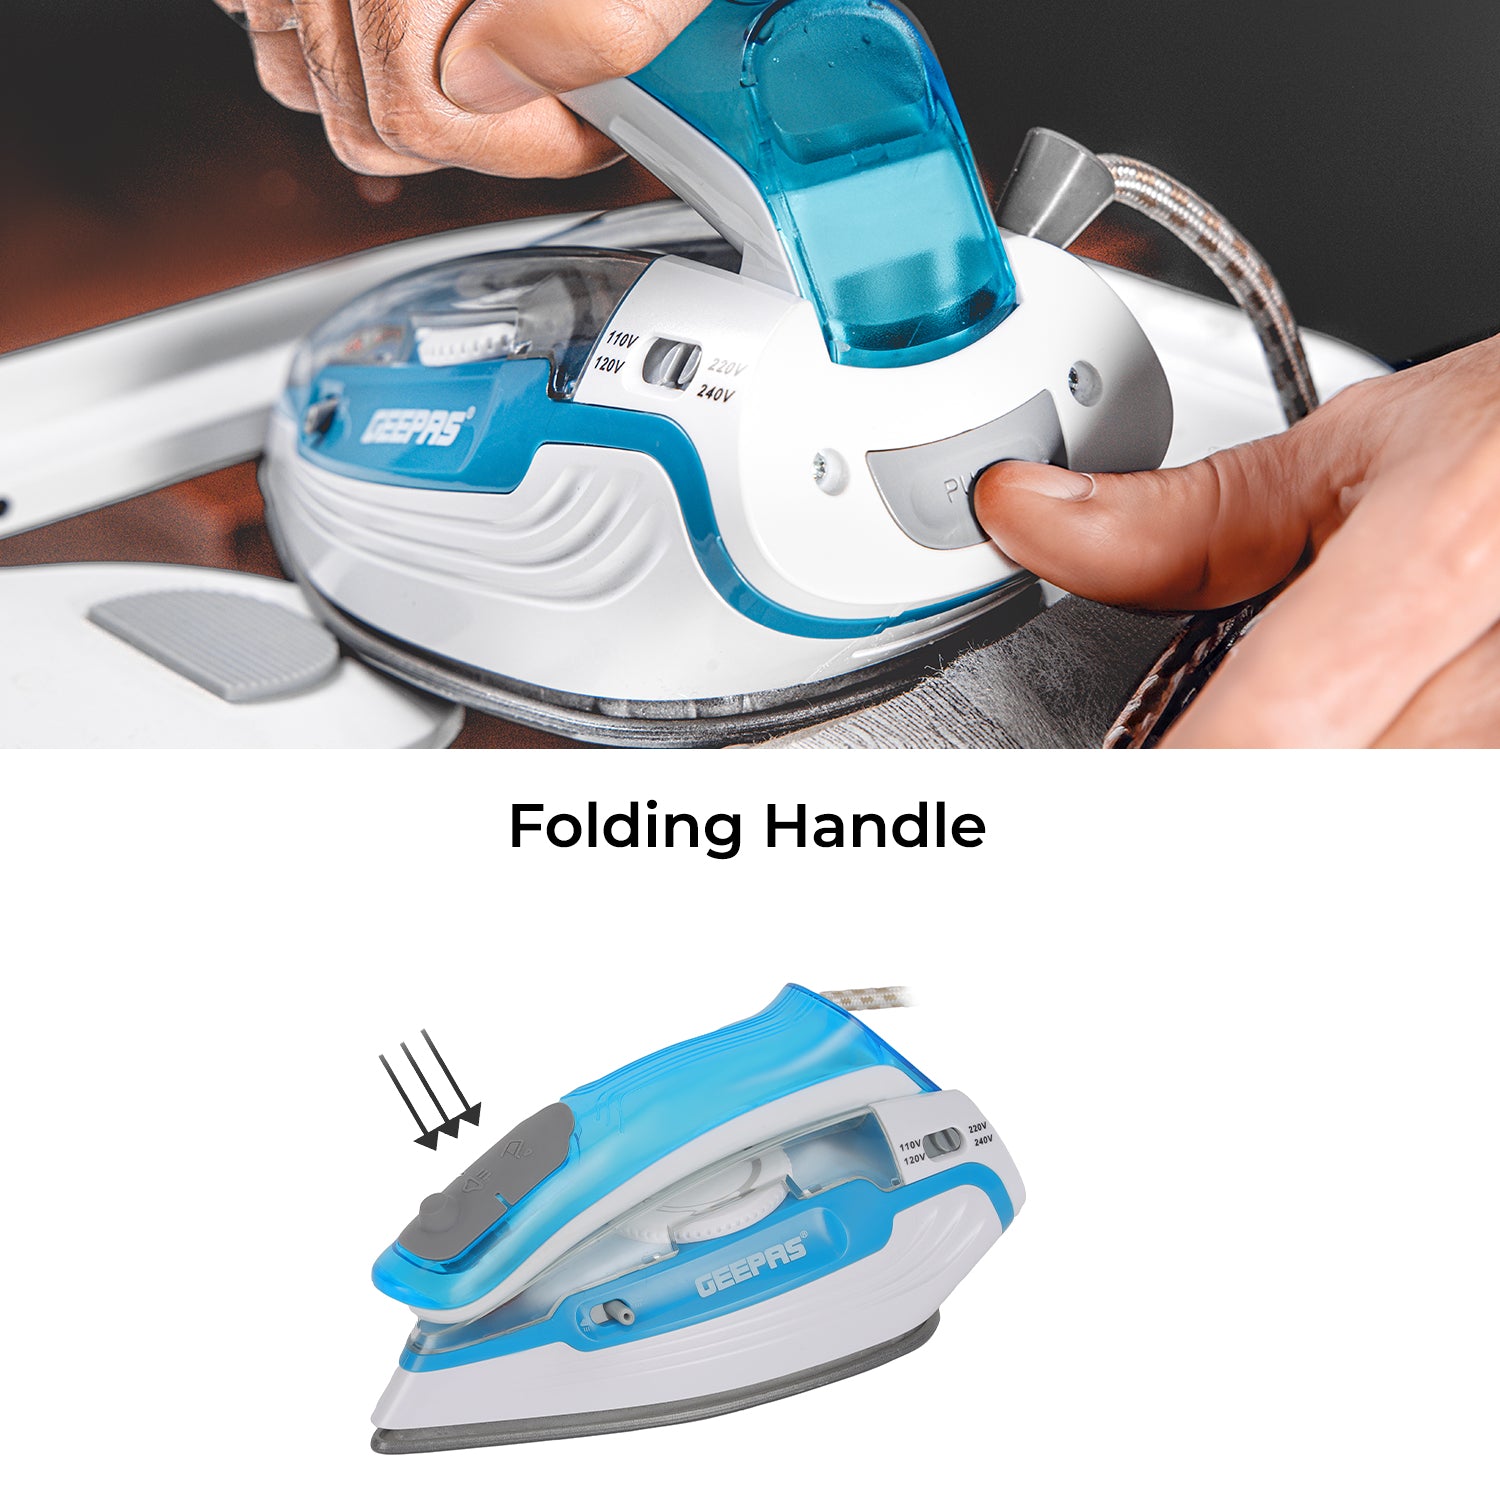 2-In-1 Portable Wet and Dry Travel Iron With Foldable Handle